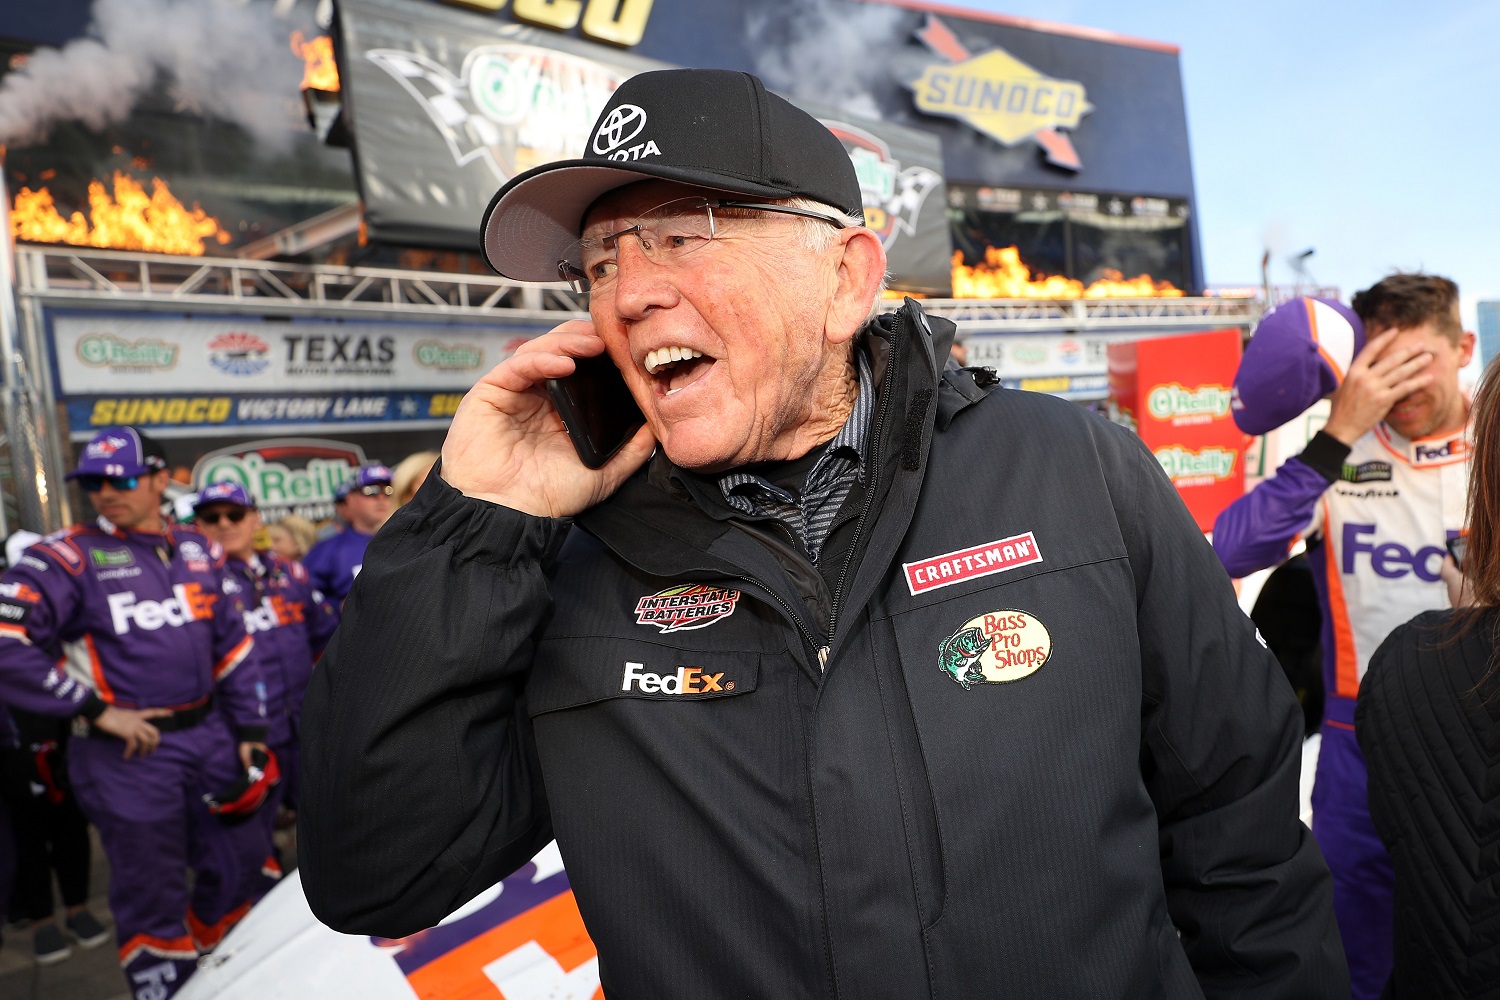 Joe Gibbs has built one of the most successful NASCAR Cup Series organizations.